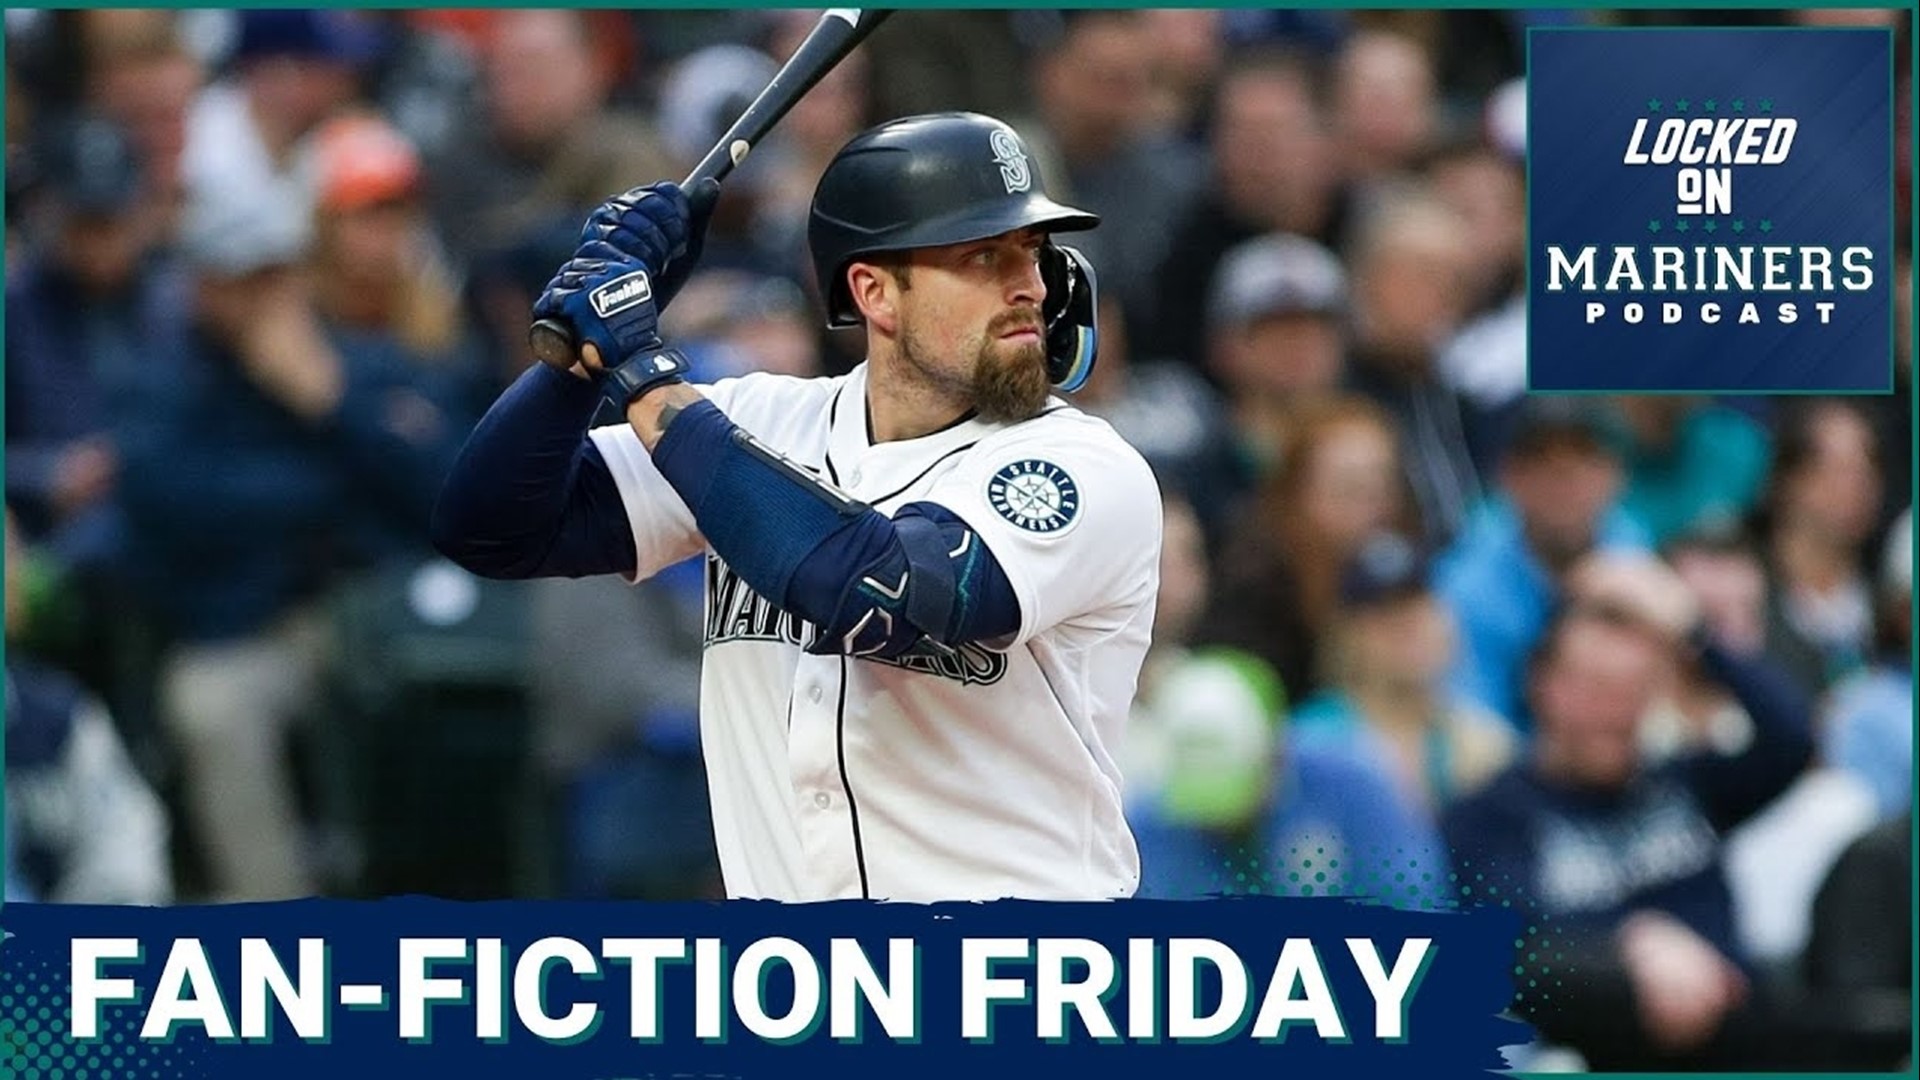 On this week's installment of Fan Fiction Friday, Colby and Ty discuss why trading Tom Murphy doesn't currently make sense for the Seattle Mariners, and more.